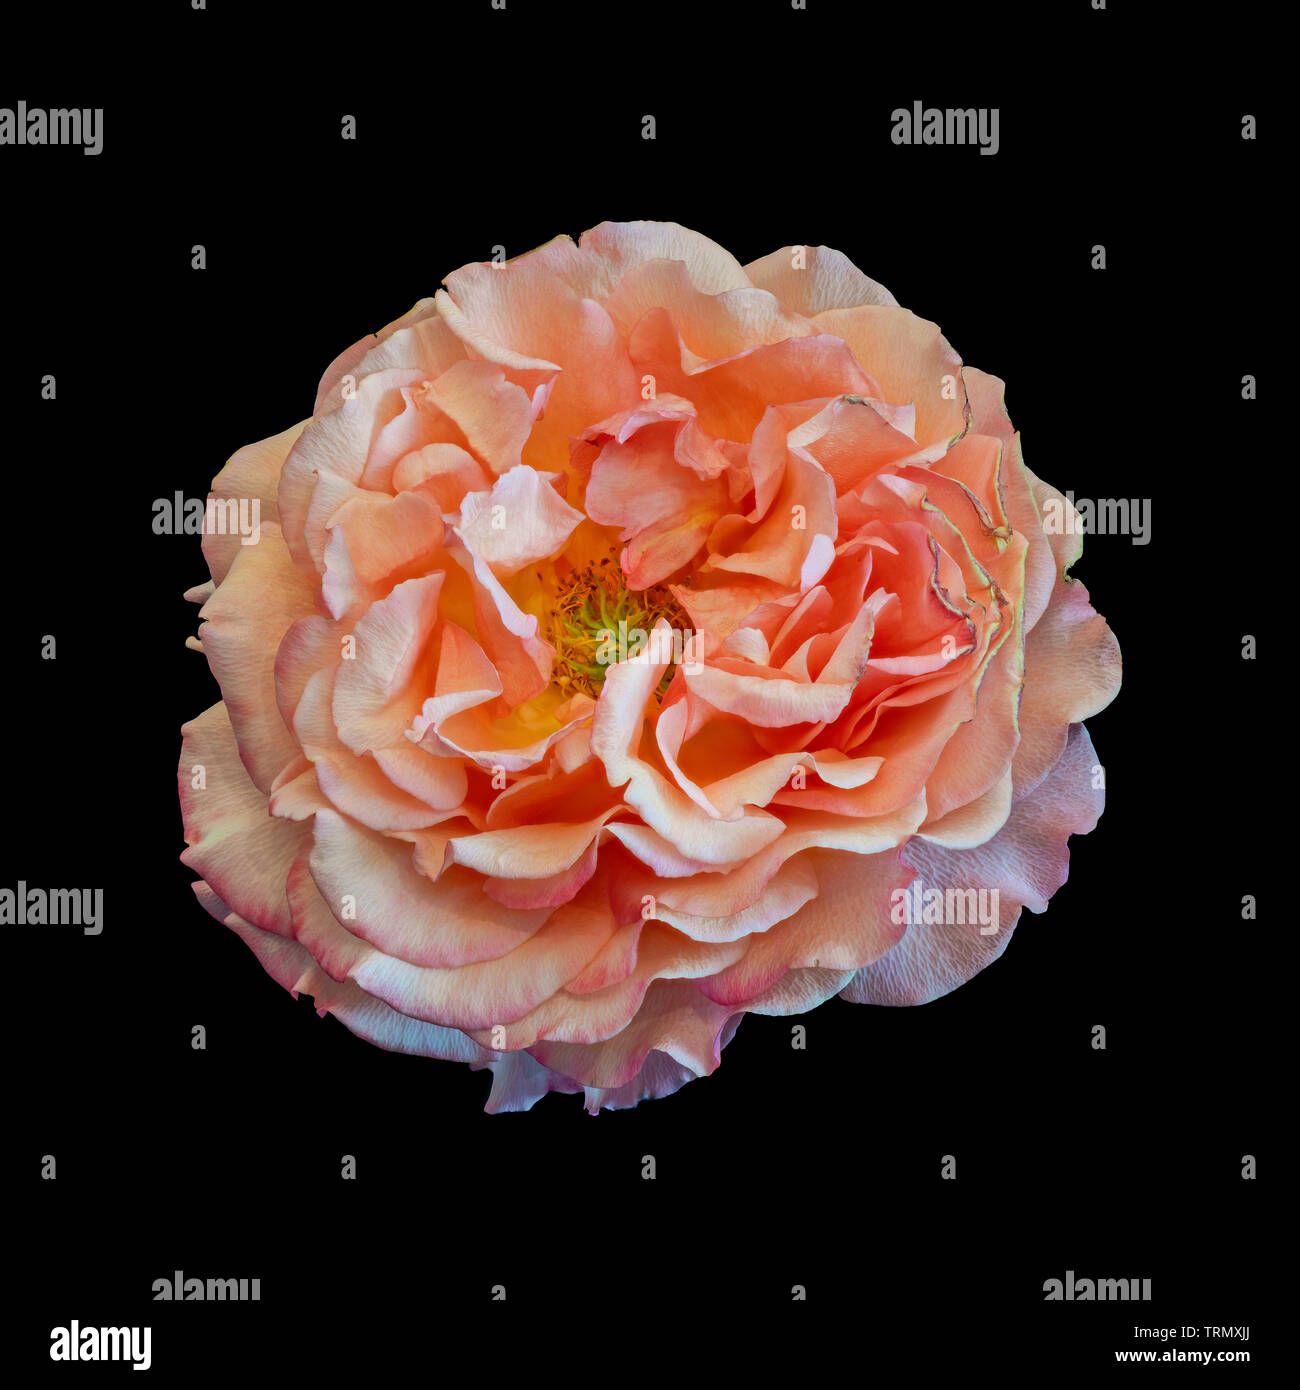 orange pink rose blossom macro isolated on black background, a fine art still life close-up of a single bloom in vintage painting style Stock Photo